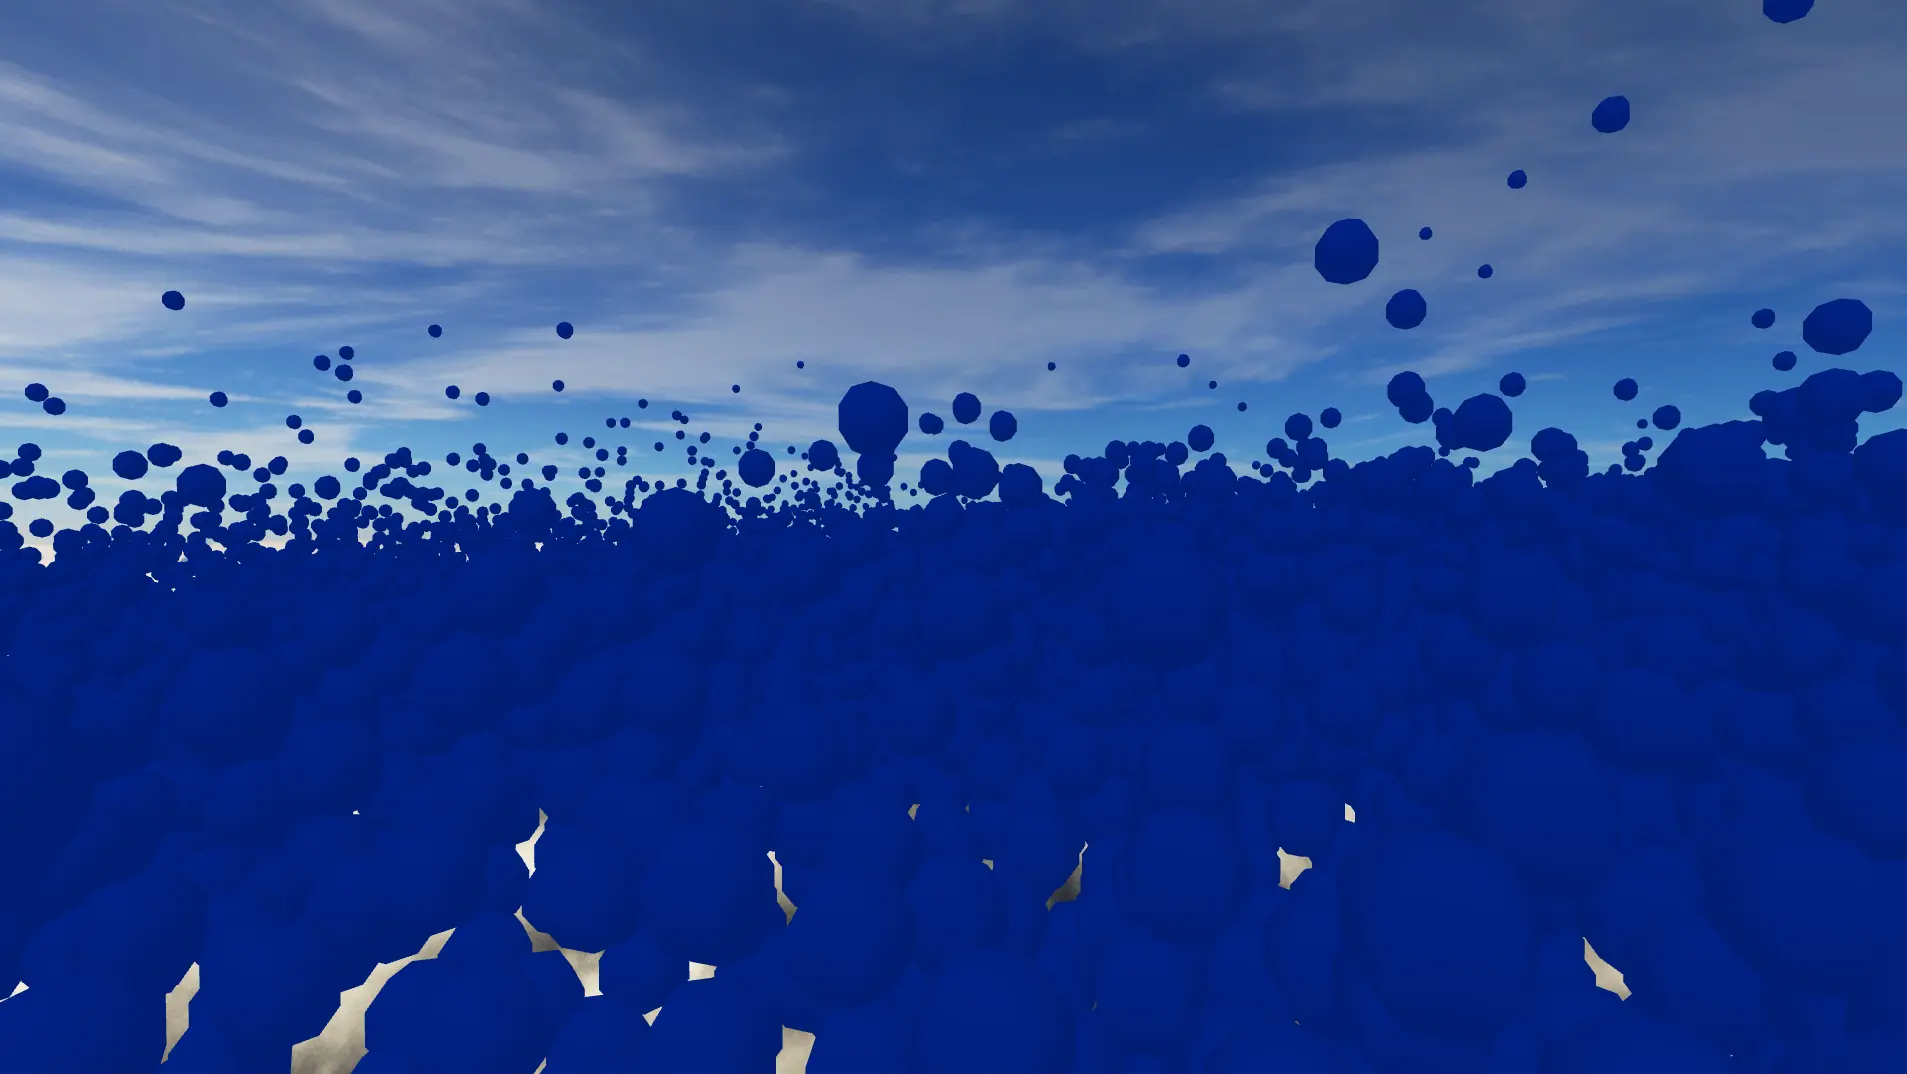 Image of Particle Simulation